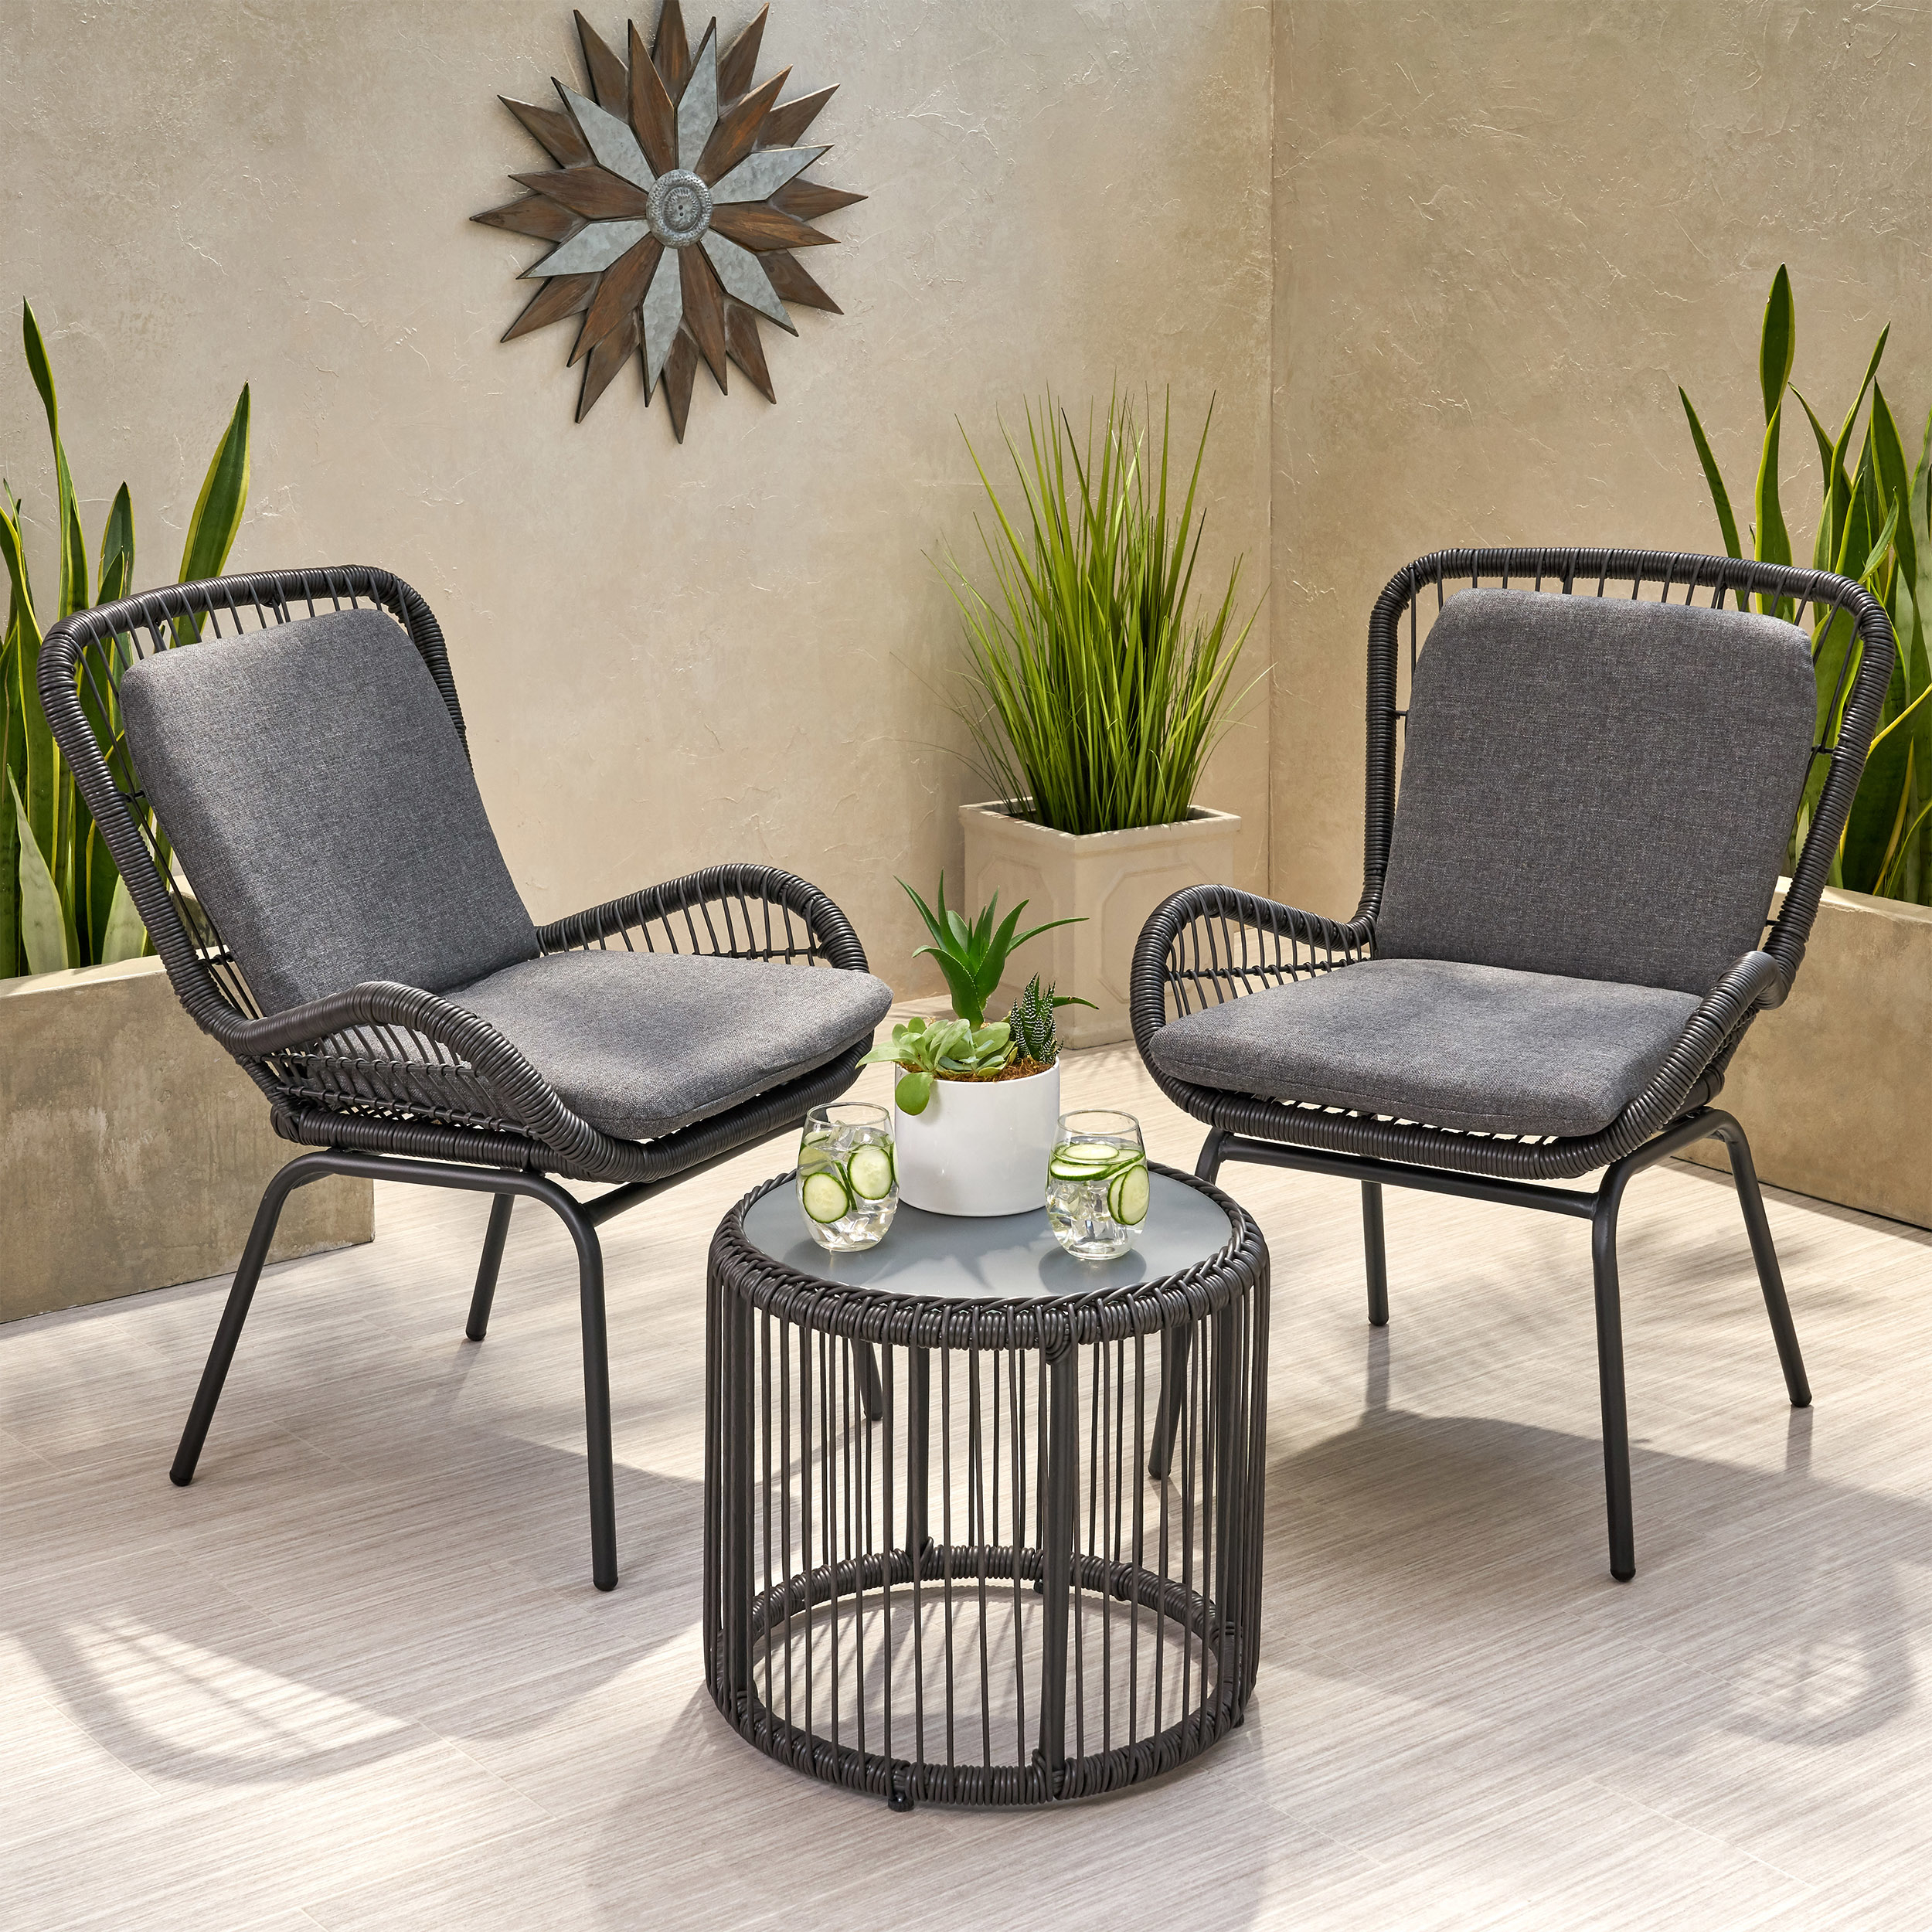 Belle Outdoor Wicker Chat Set With Cushions - Light Brown + Beige + Black